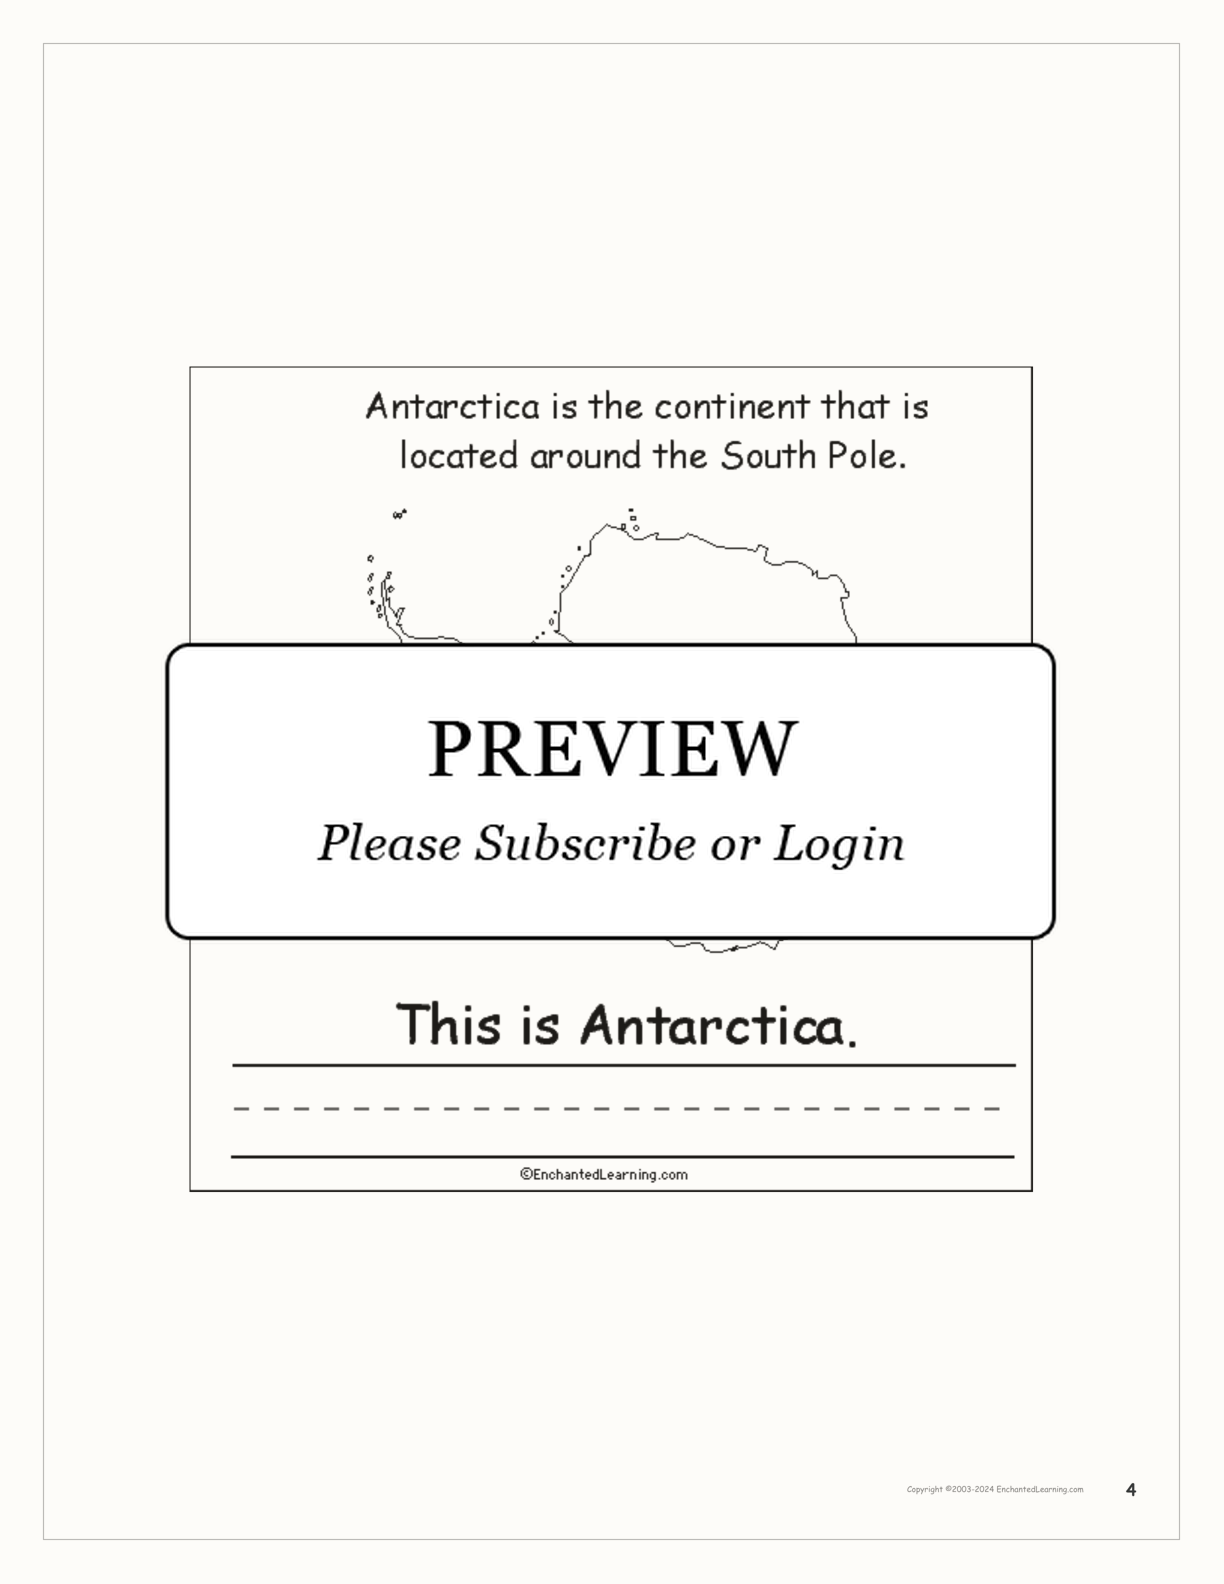 The Seven Continents Book interactive printout page 4